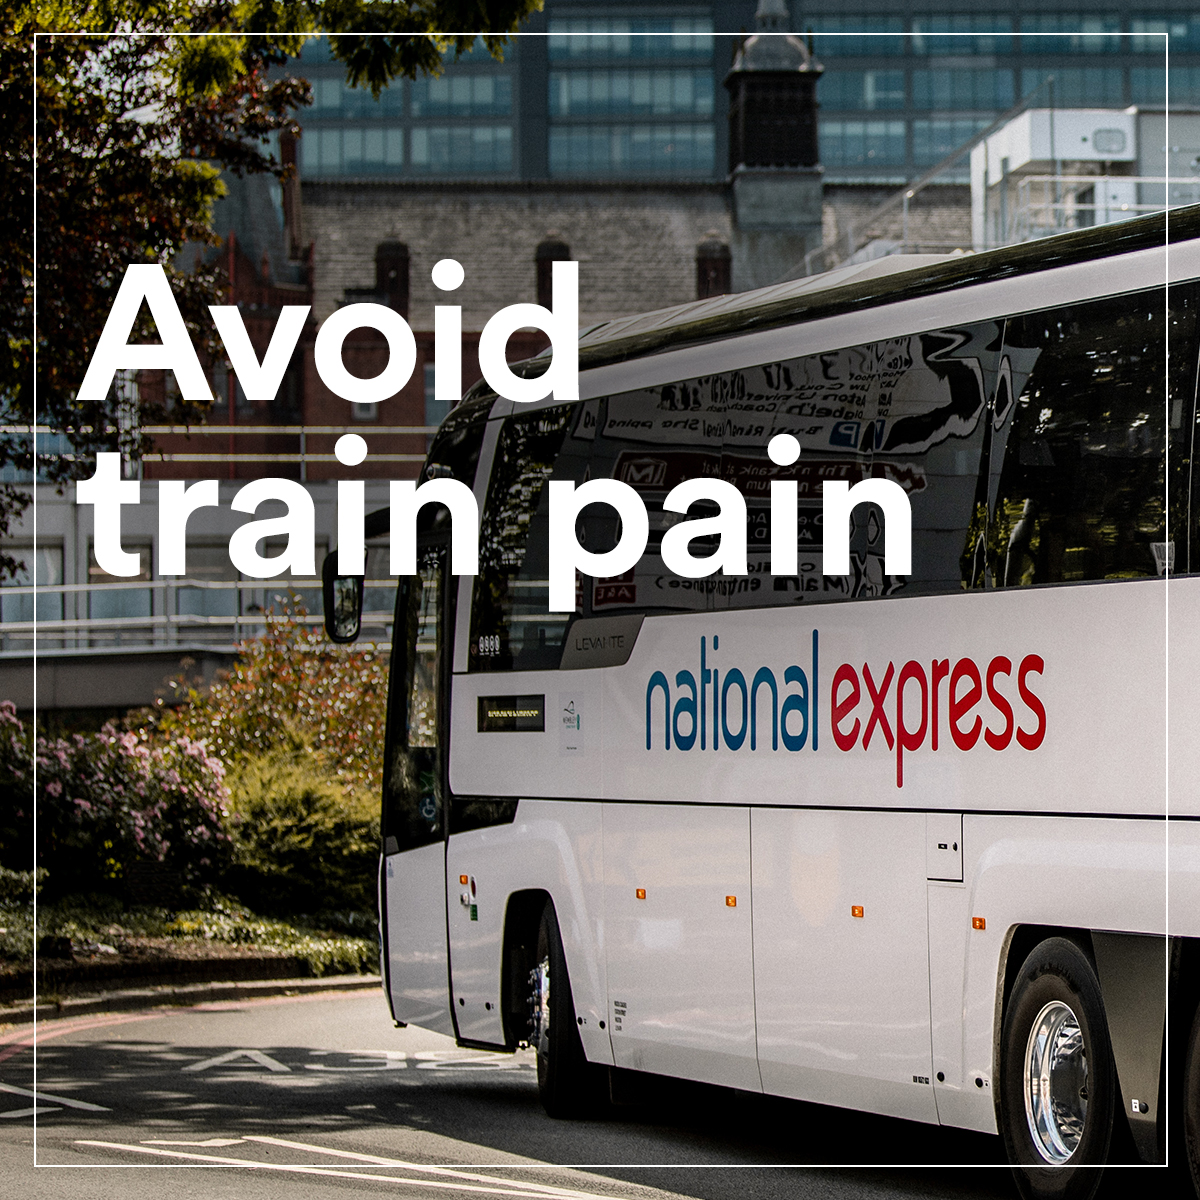 Don’t let the rail strikes ruin your travel plans. Travel with National Express: 💸 Great value fares 💺 Guaranteed a comfortable seat 🧳 Generous luggage allowance 📱 Free Wi-Fi & charging 🗺 We travel to 100's destinations around the UK Find out more: bit.ly/4aPhPtD